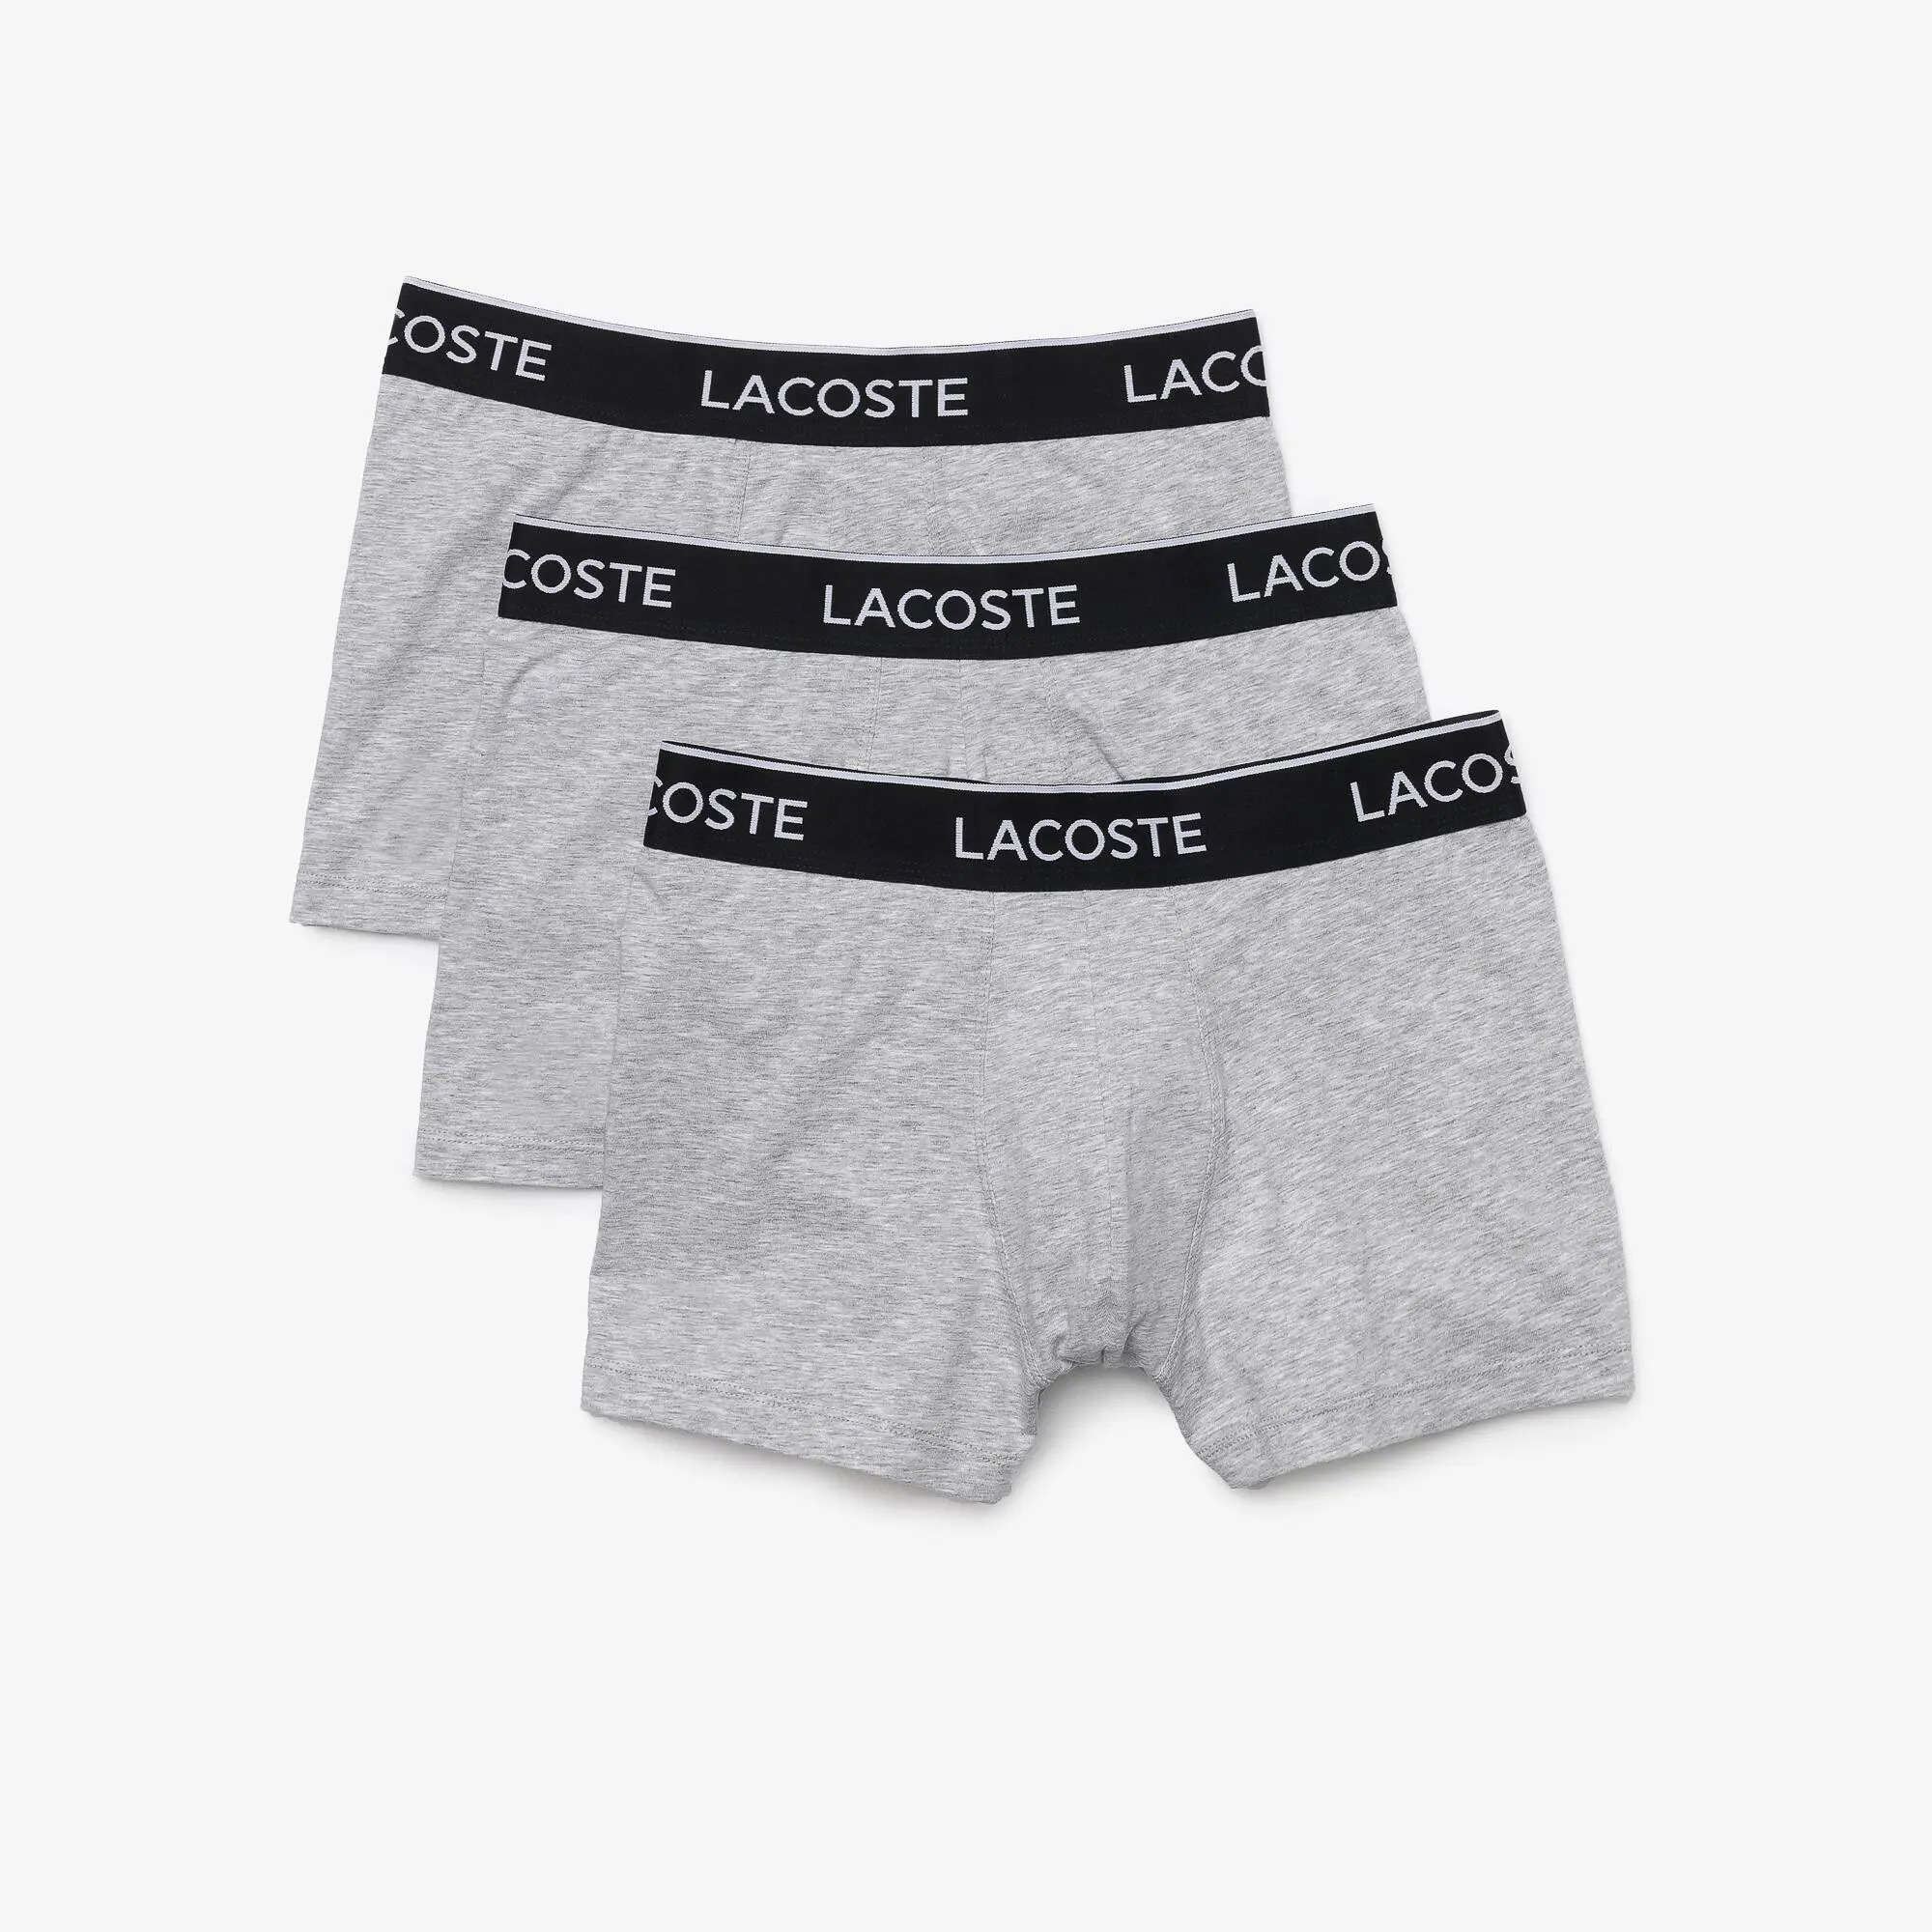 Lacoste Pack Of 3 Casual Black Trunks. 2